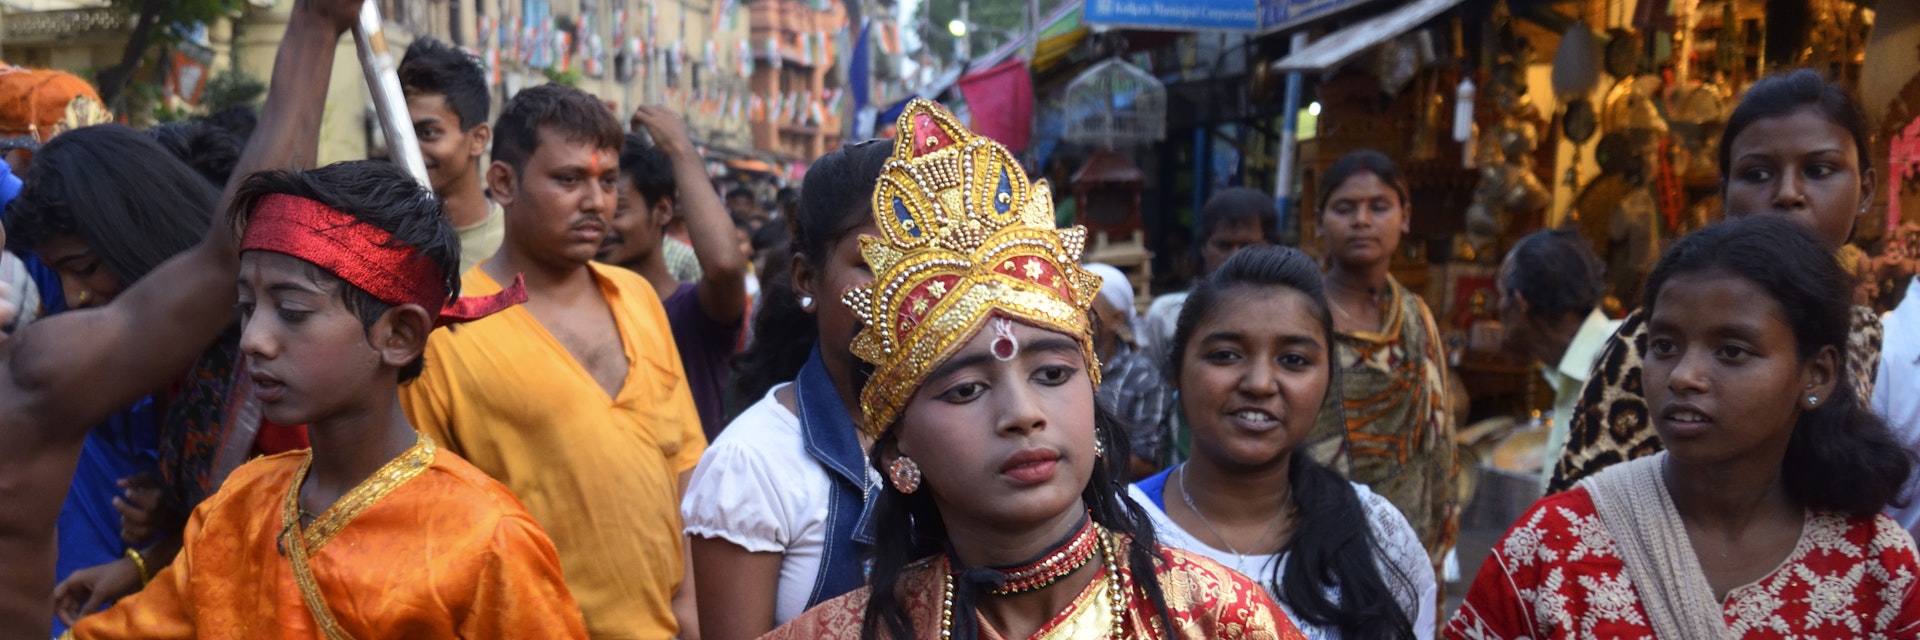 KOLKATA, INDIA - 2015/04/17: On the evening of Chaitra Sankranti the last day of Bengali calendar resident of Kalighat dress up like Hindu deities popularly known as Sang (Pantomime ) for a procession in the surrounding of Kalighat Temple. (Photo by Saikat Paul/Pacific Press/LightRocket via Getty Images)